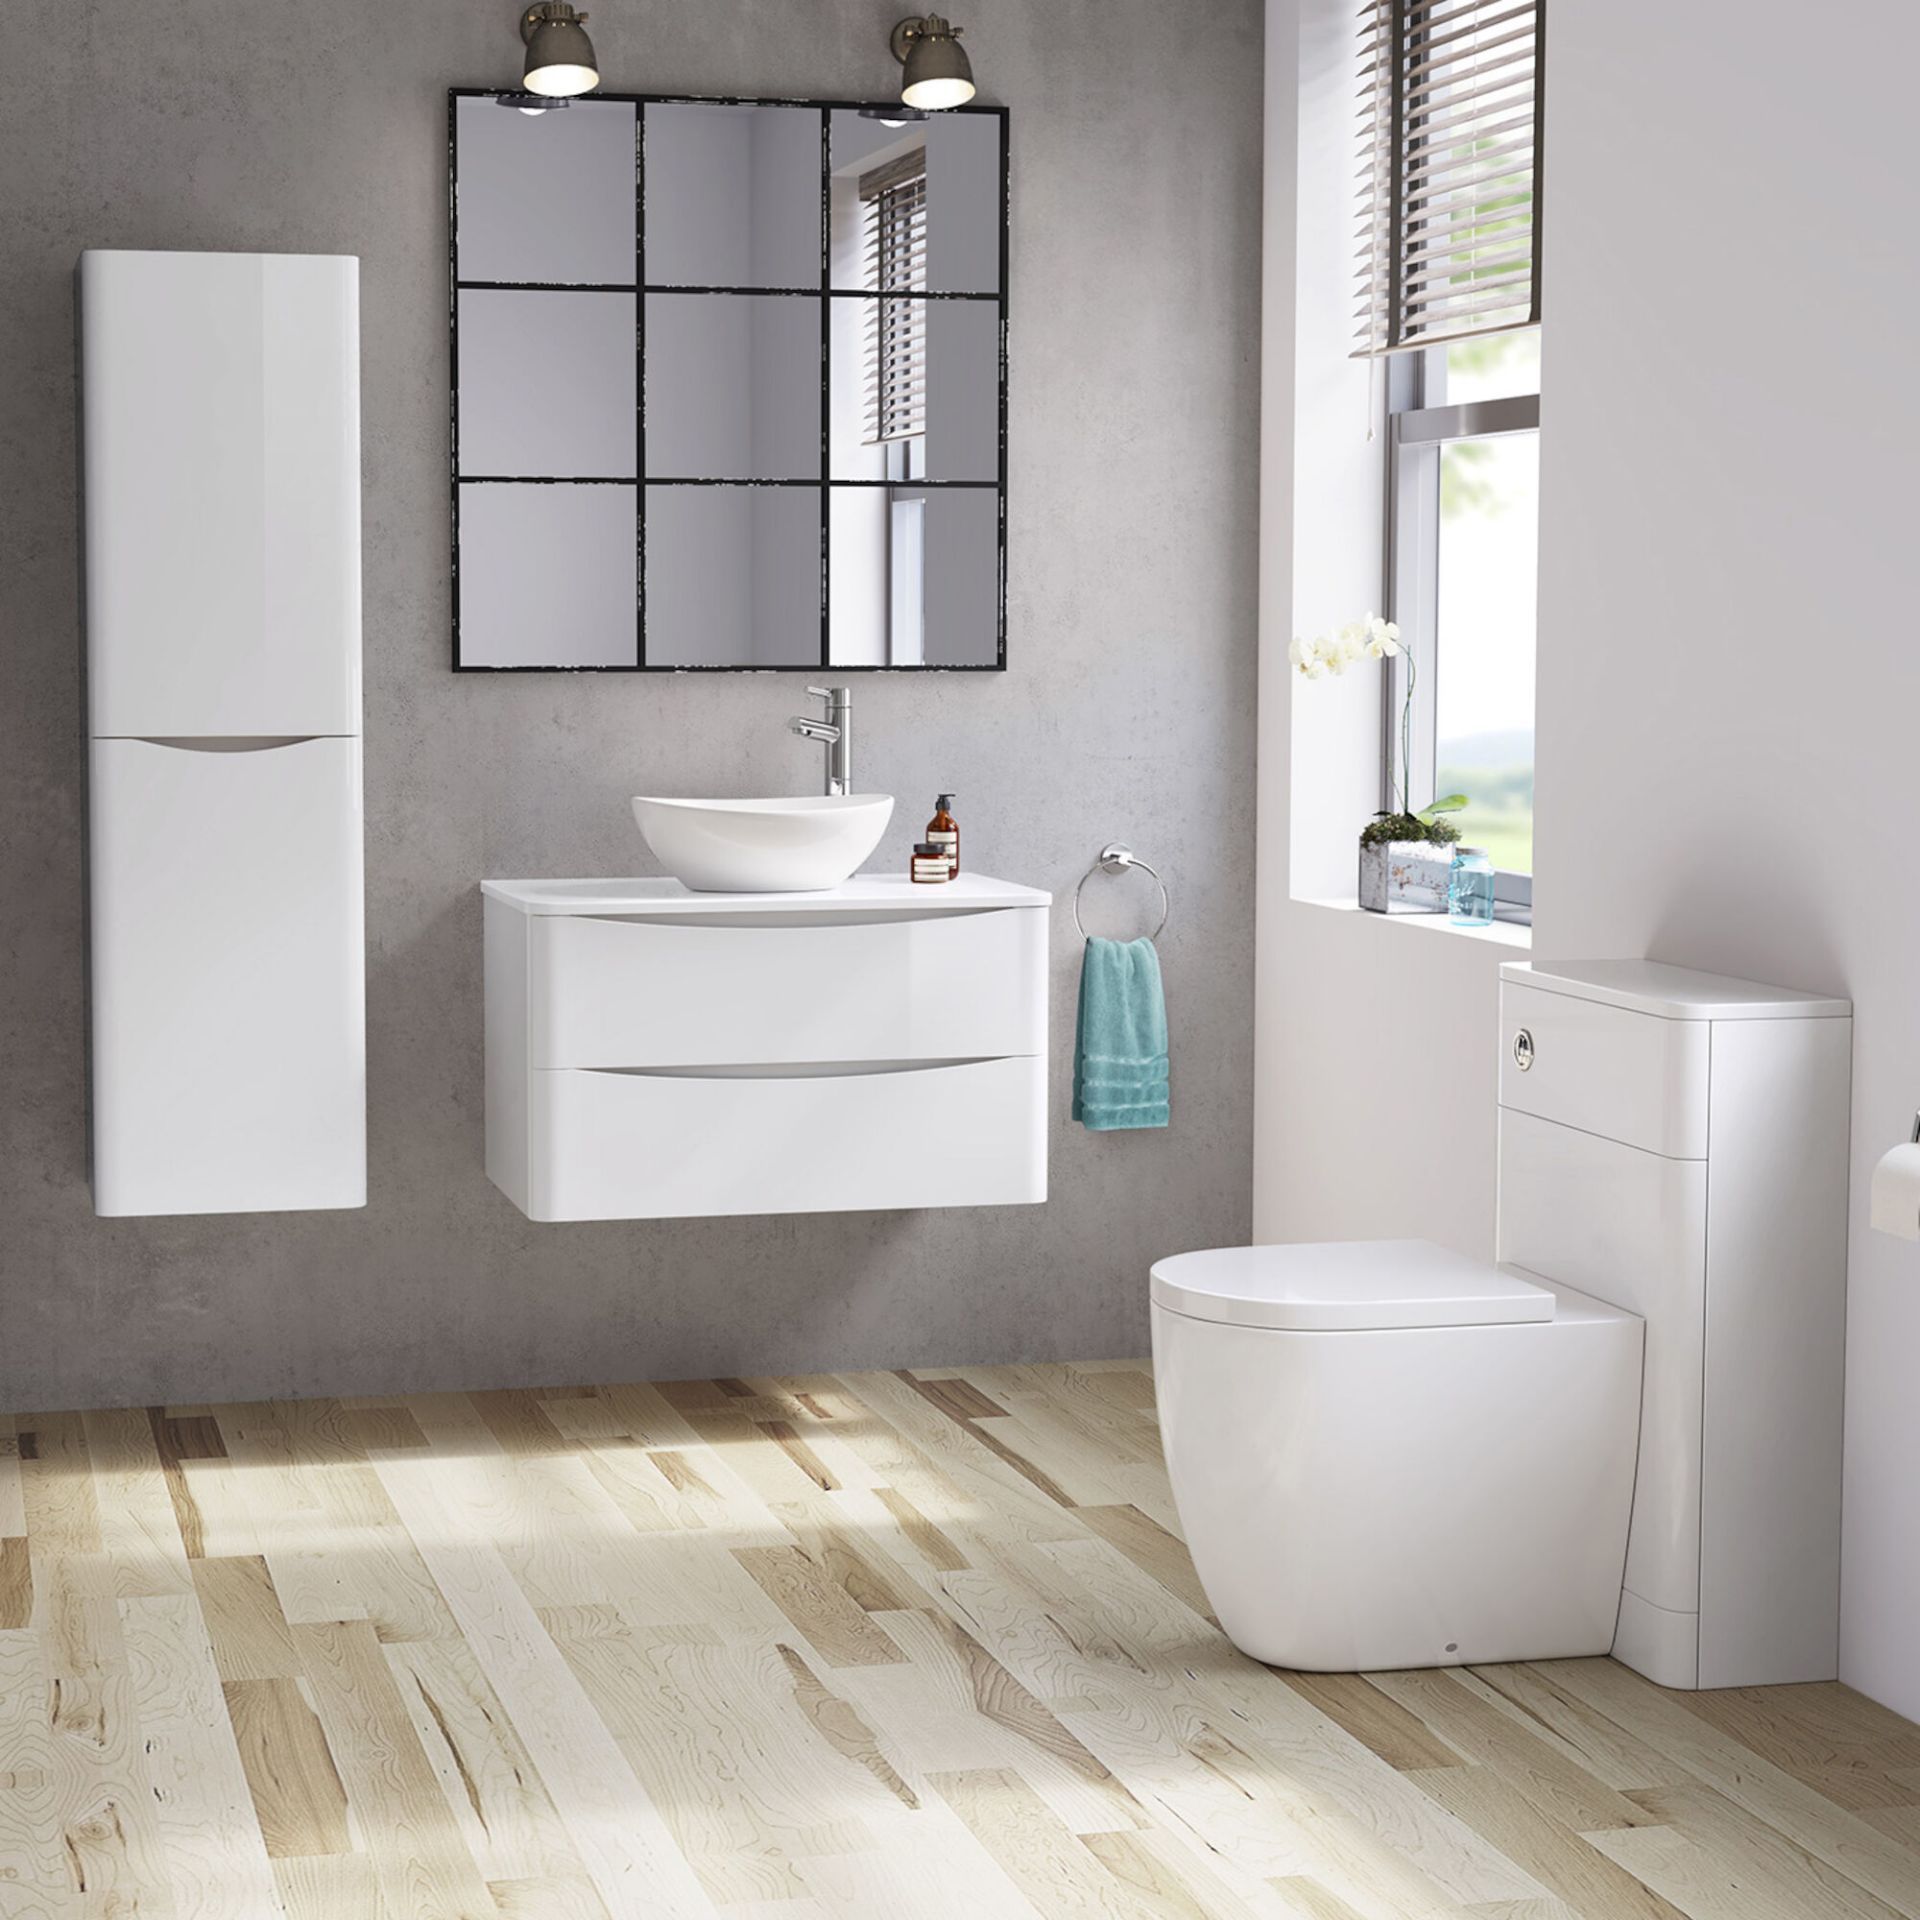 NEW & BOXED 1000mm Austin II Gloss White Countertop Unit and Camila Basin - Wall Hung. RRP £99... - Image 2 of 3